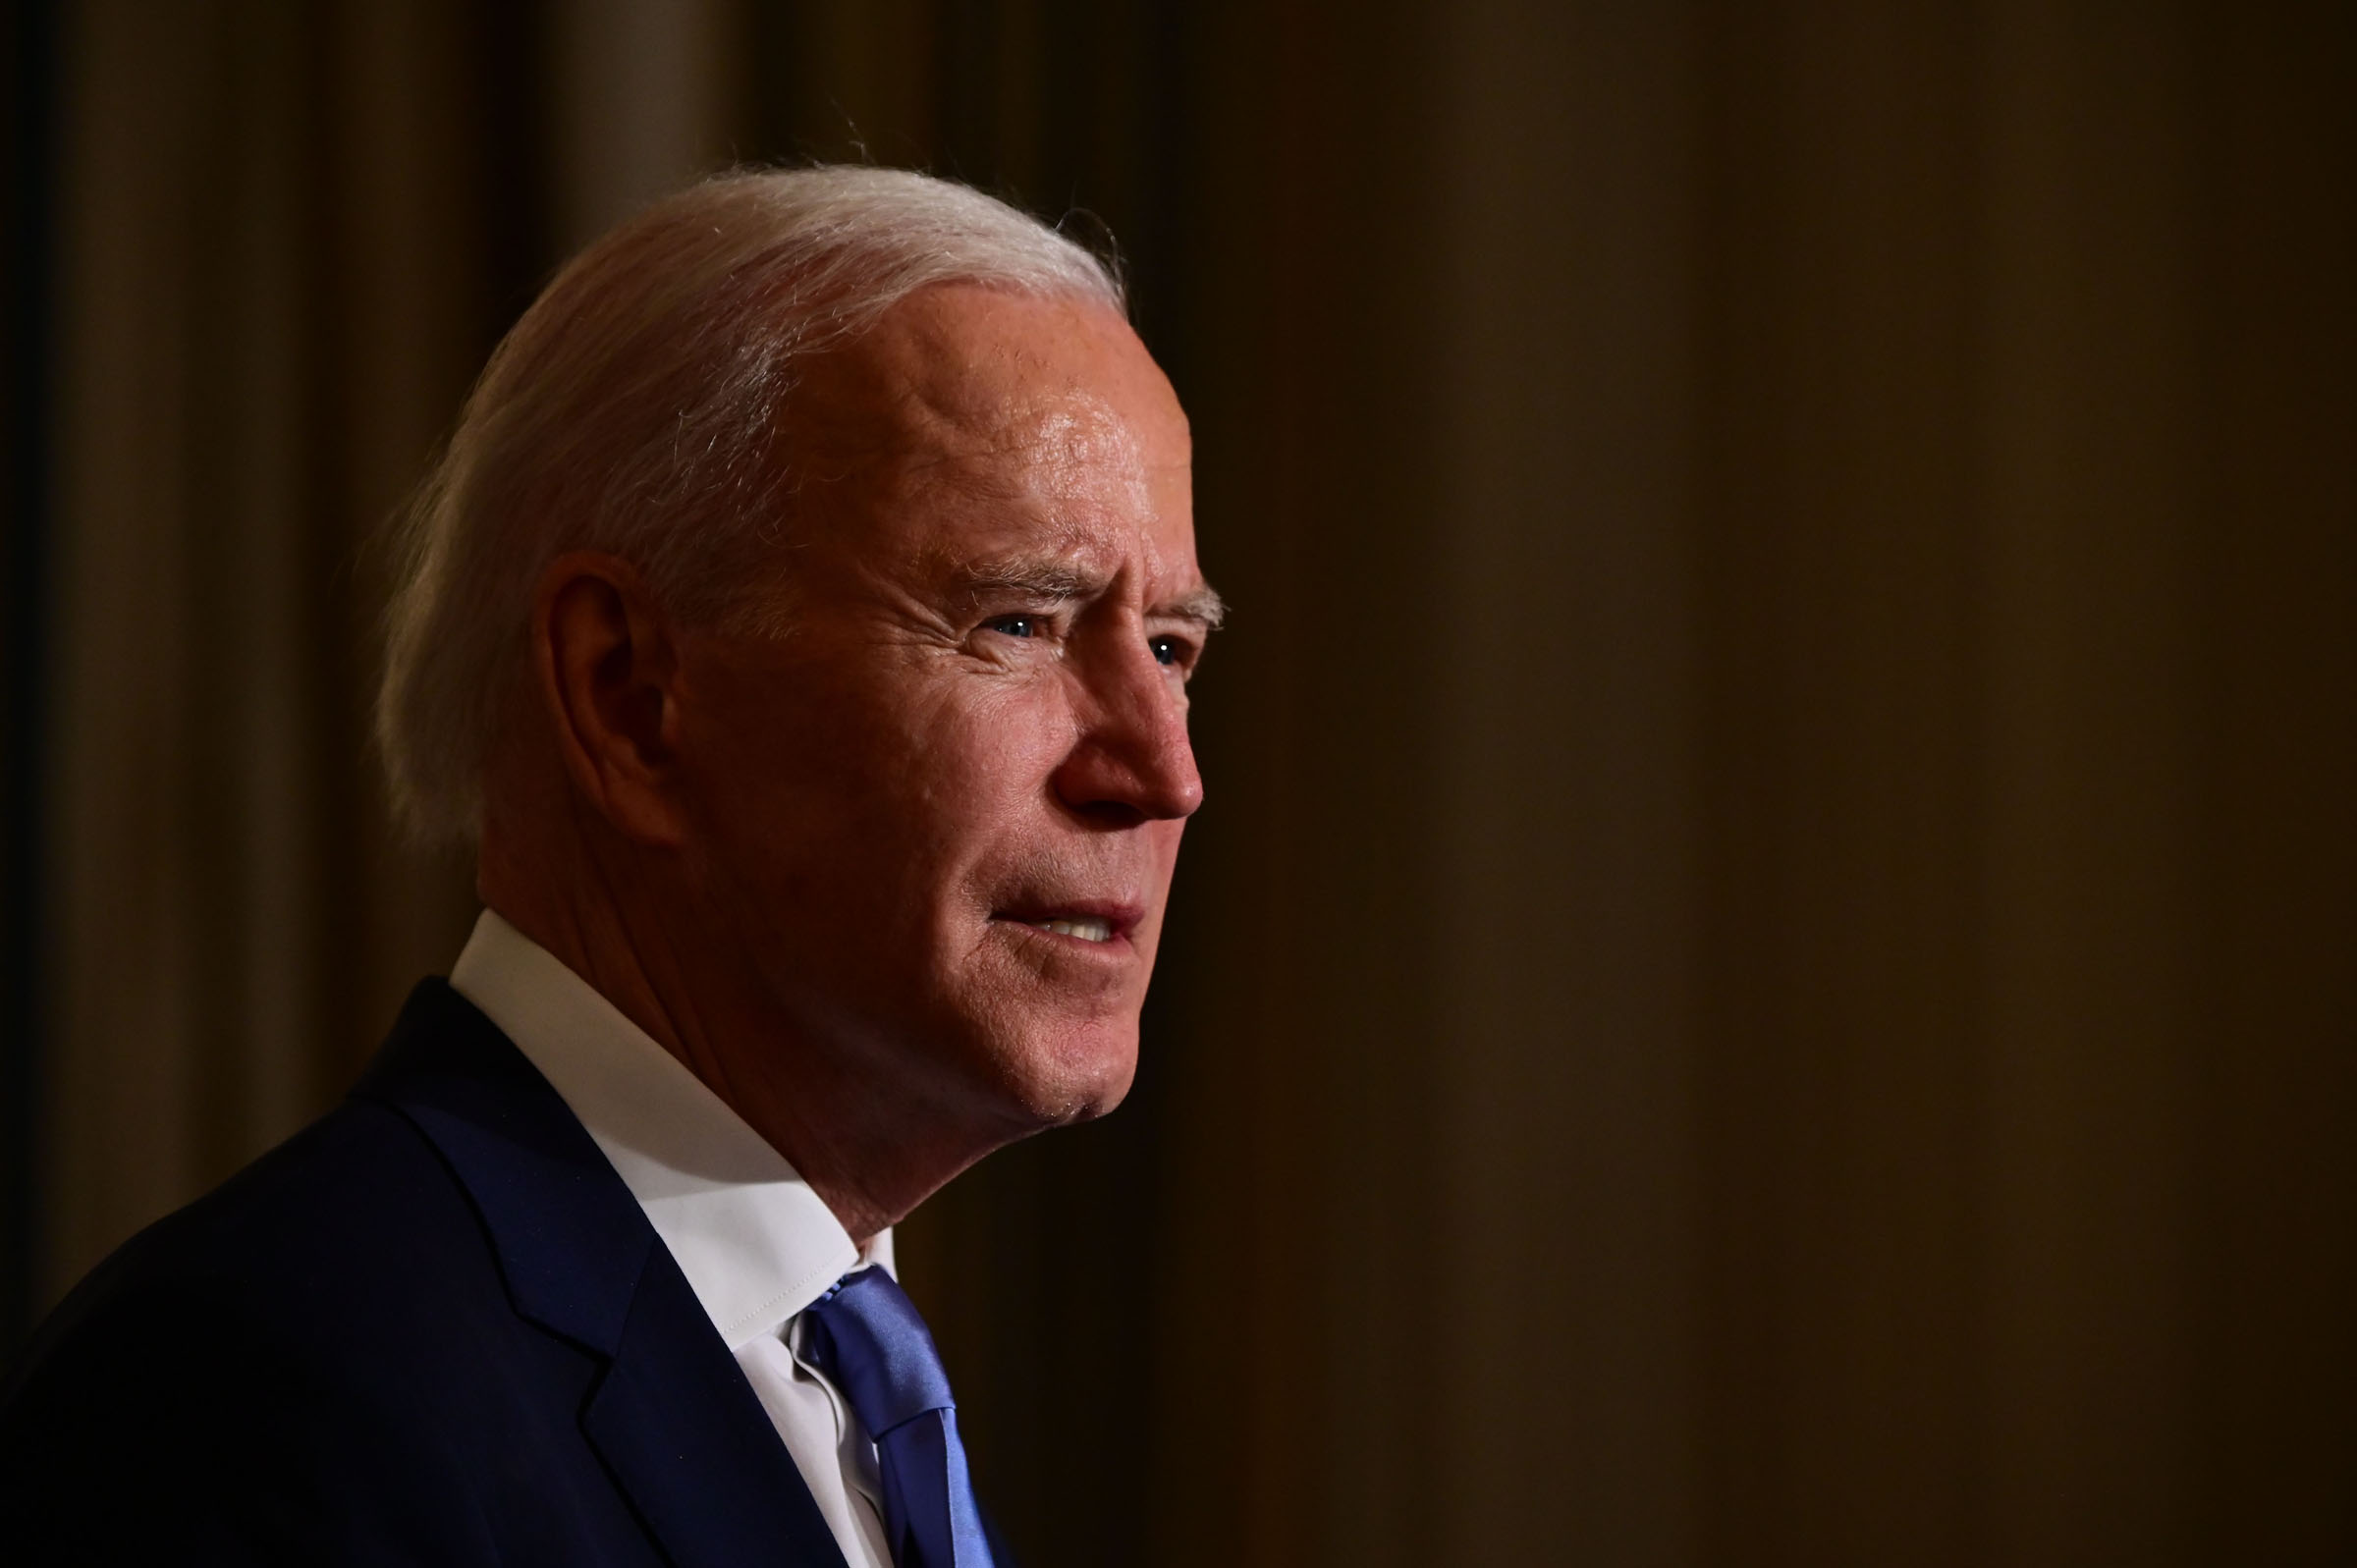 Biden unveils sweeping COVID-19 plan in first full day in office